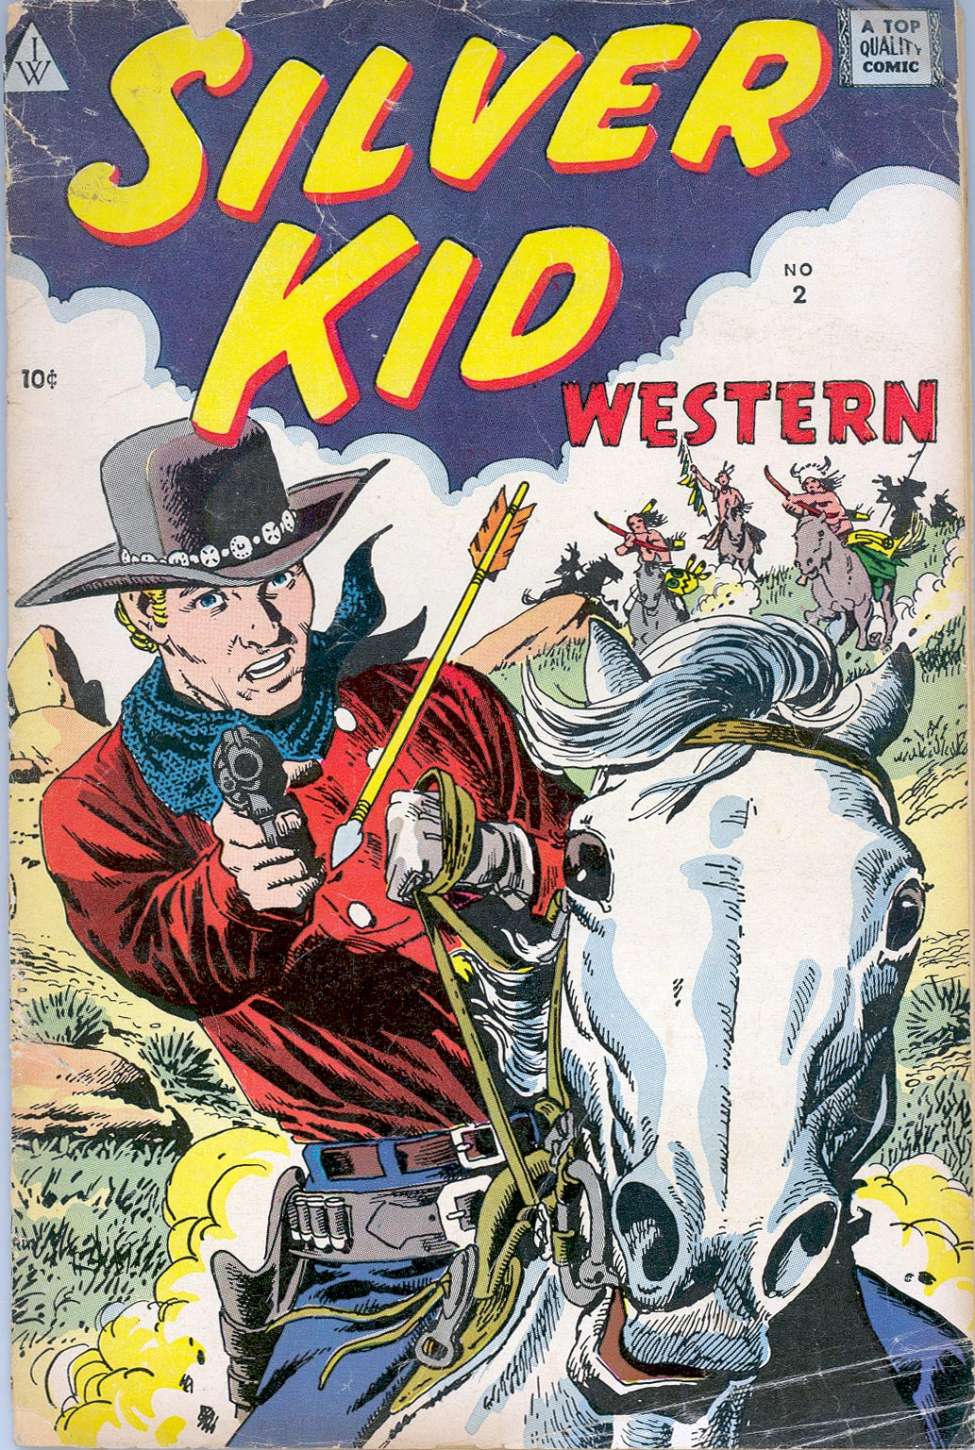 Book Cover For Silver Kid Western 1